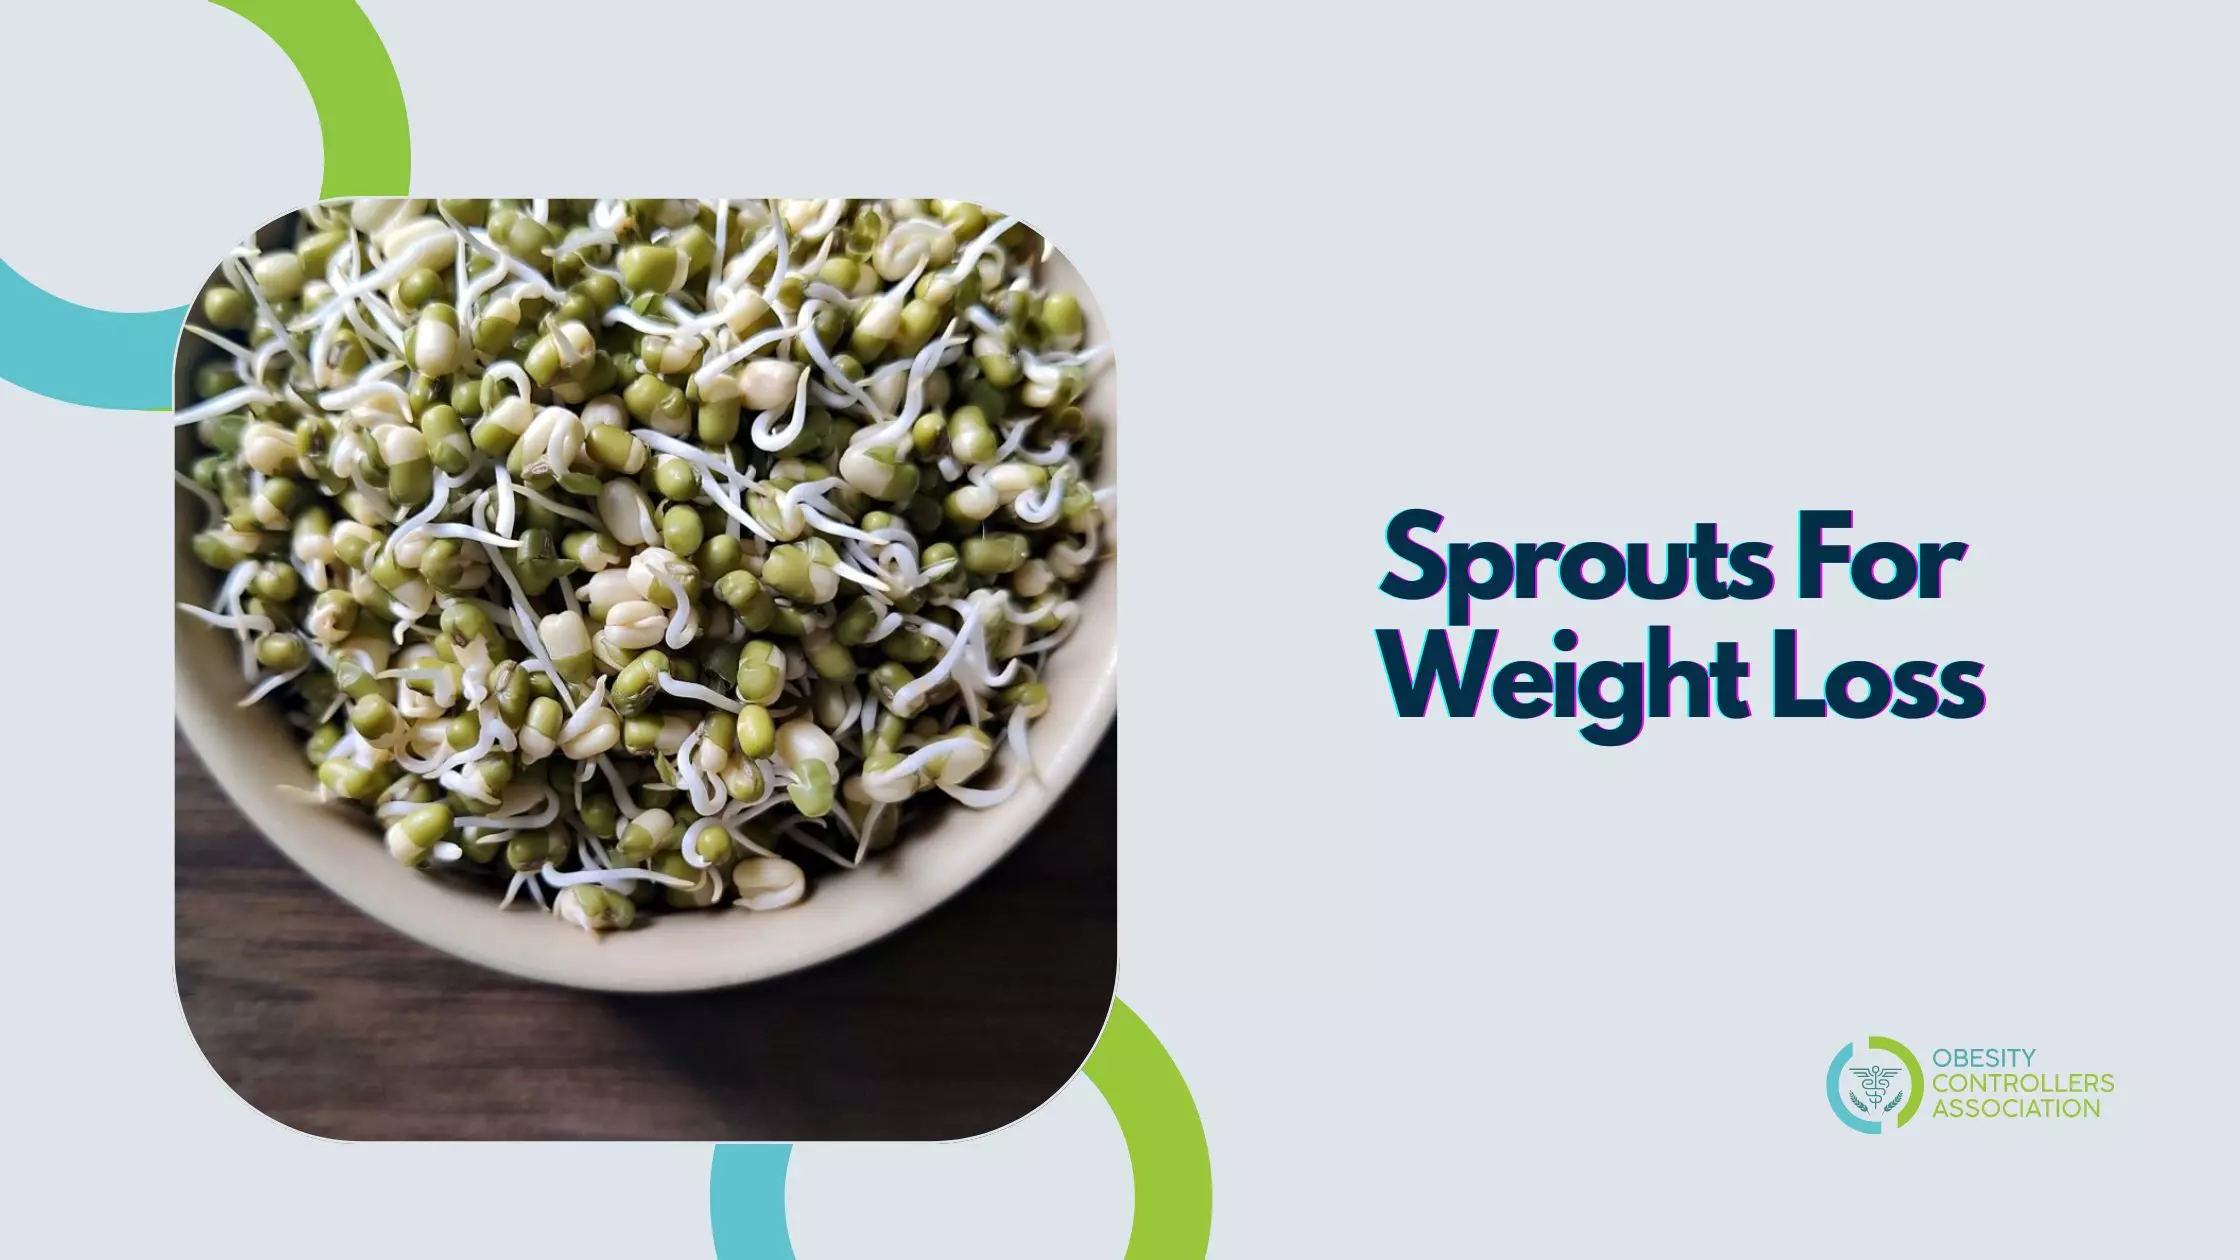 Sprouts For Weight Loss